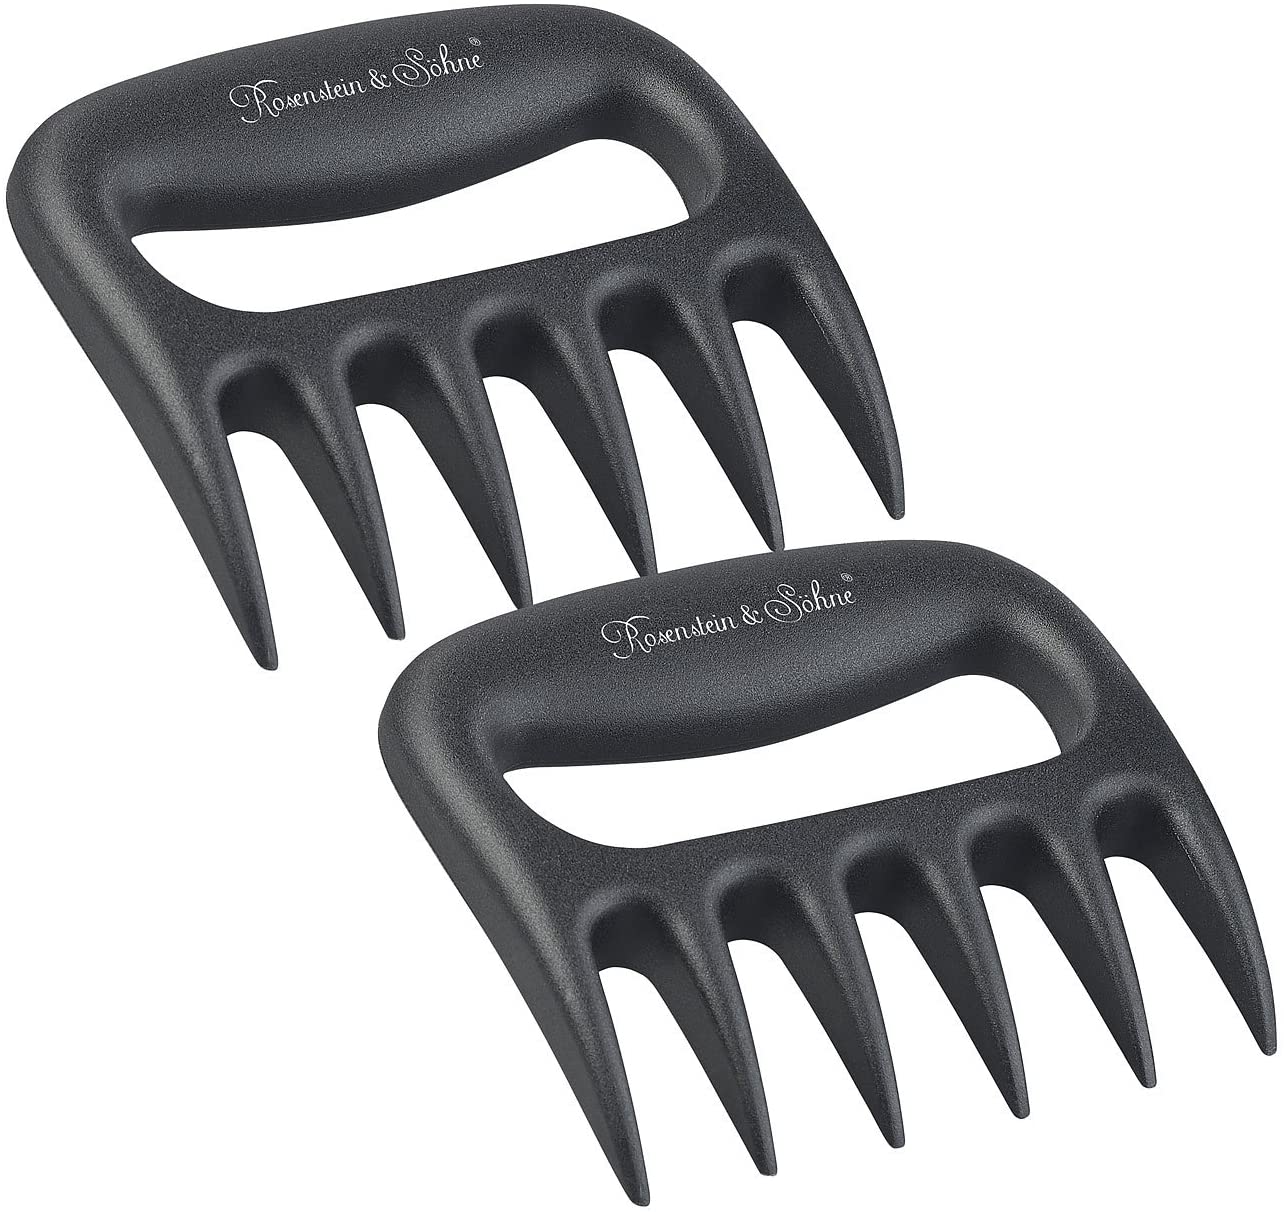 ROSENSTEIN & SOHNE Rosenstein & Söhne Meat claws: set of 2 meat claws made of heat-resistant plastic, BPA-free (BBQ claws)